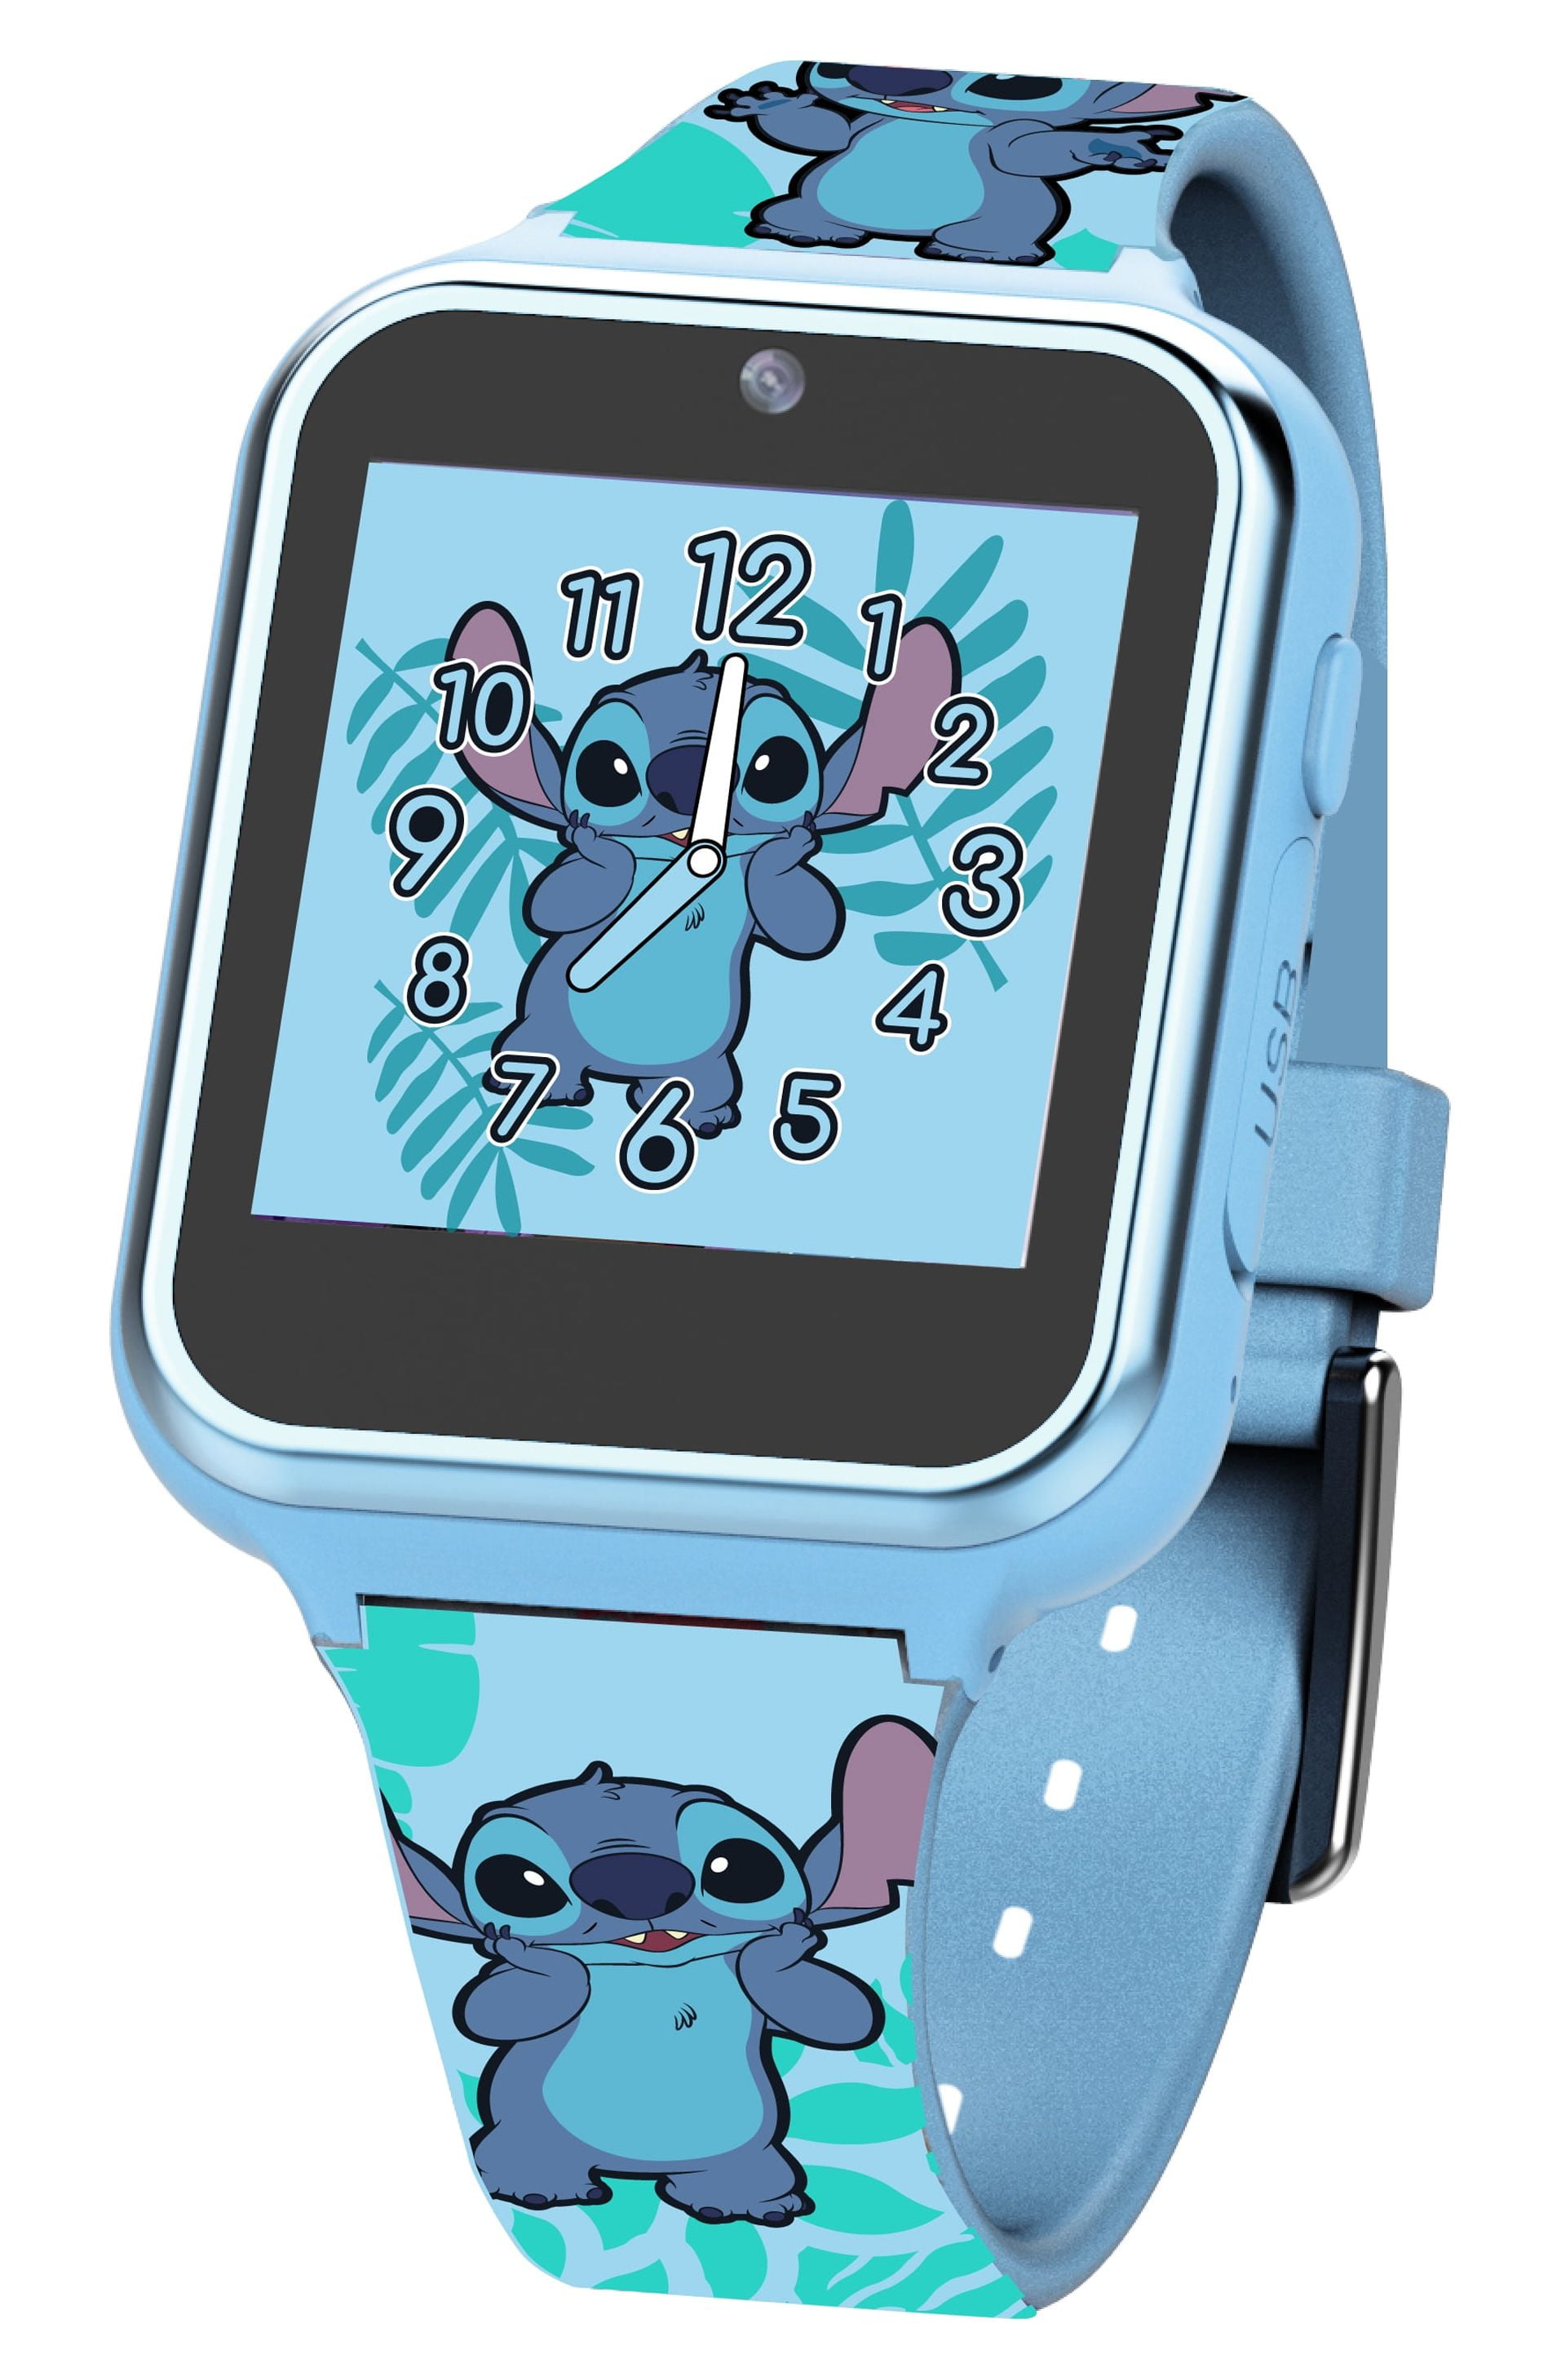 Accutime Kids Disney Lilo and Stitch Blue Digital LCD Quartz Childrens Wrist Watch for Boys, Girls, Toddlers with Multicolor Graphic Strap (Model